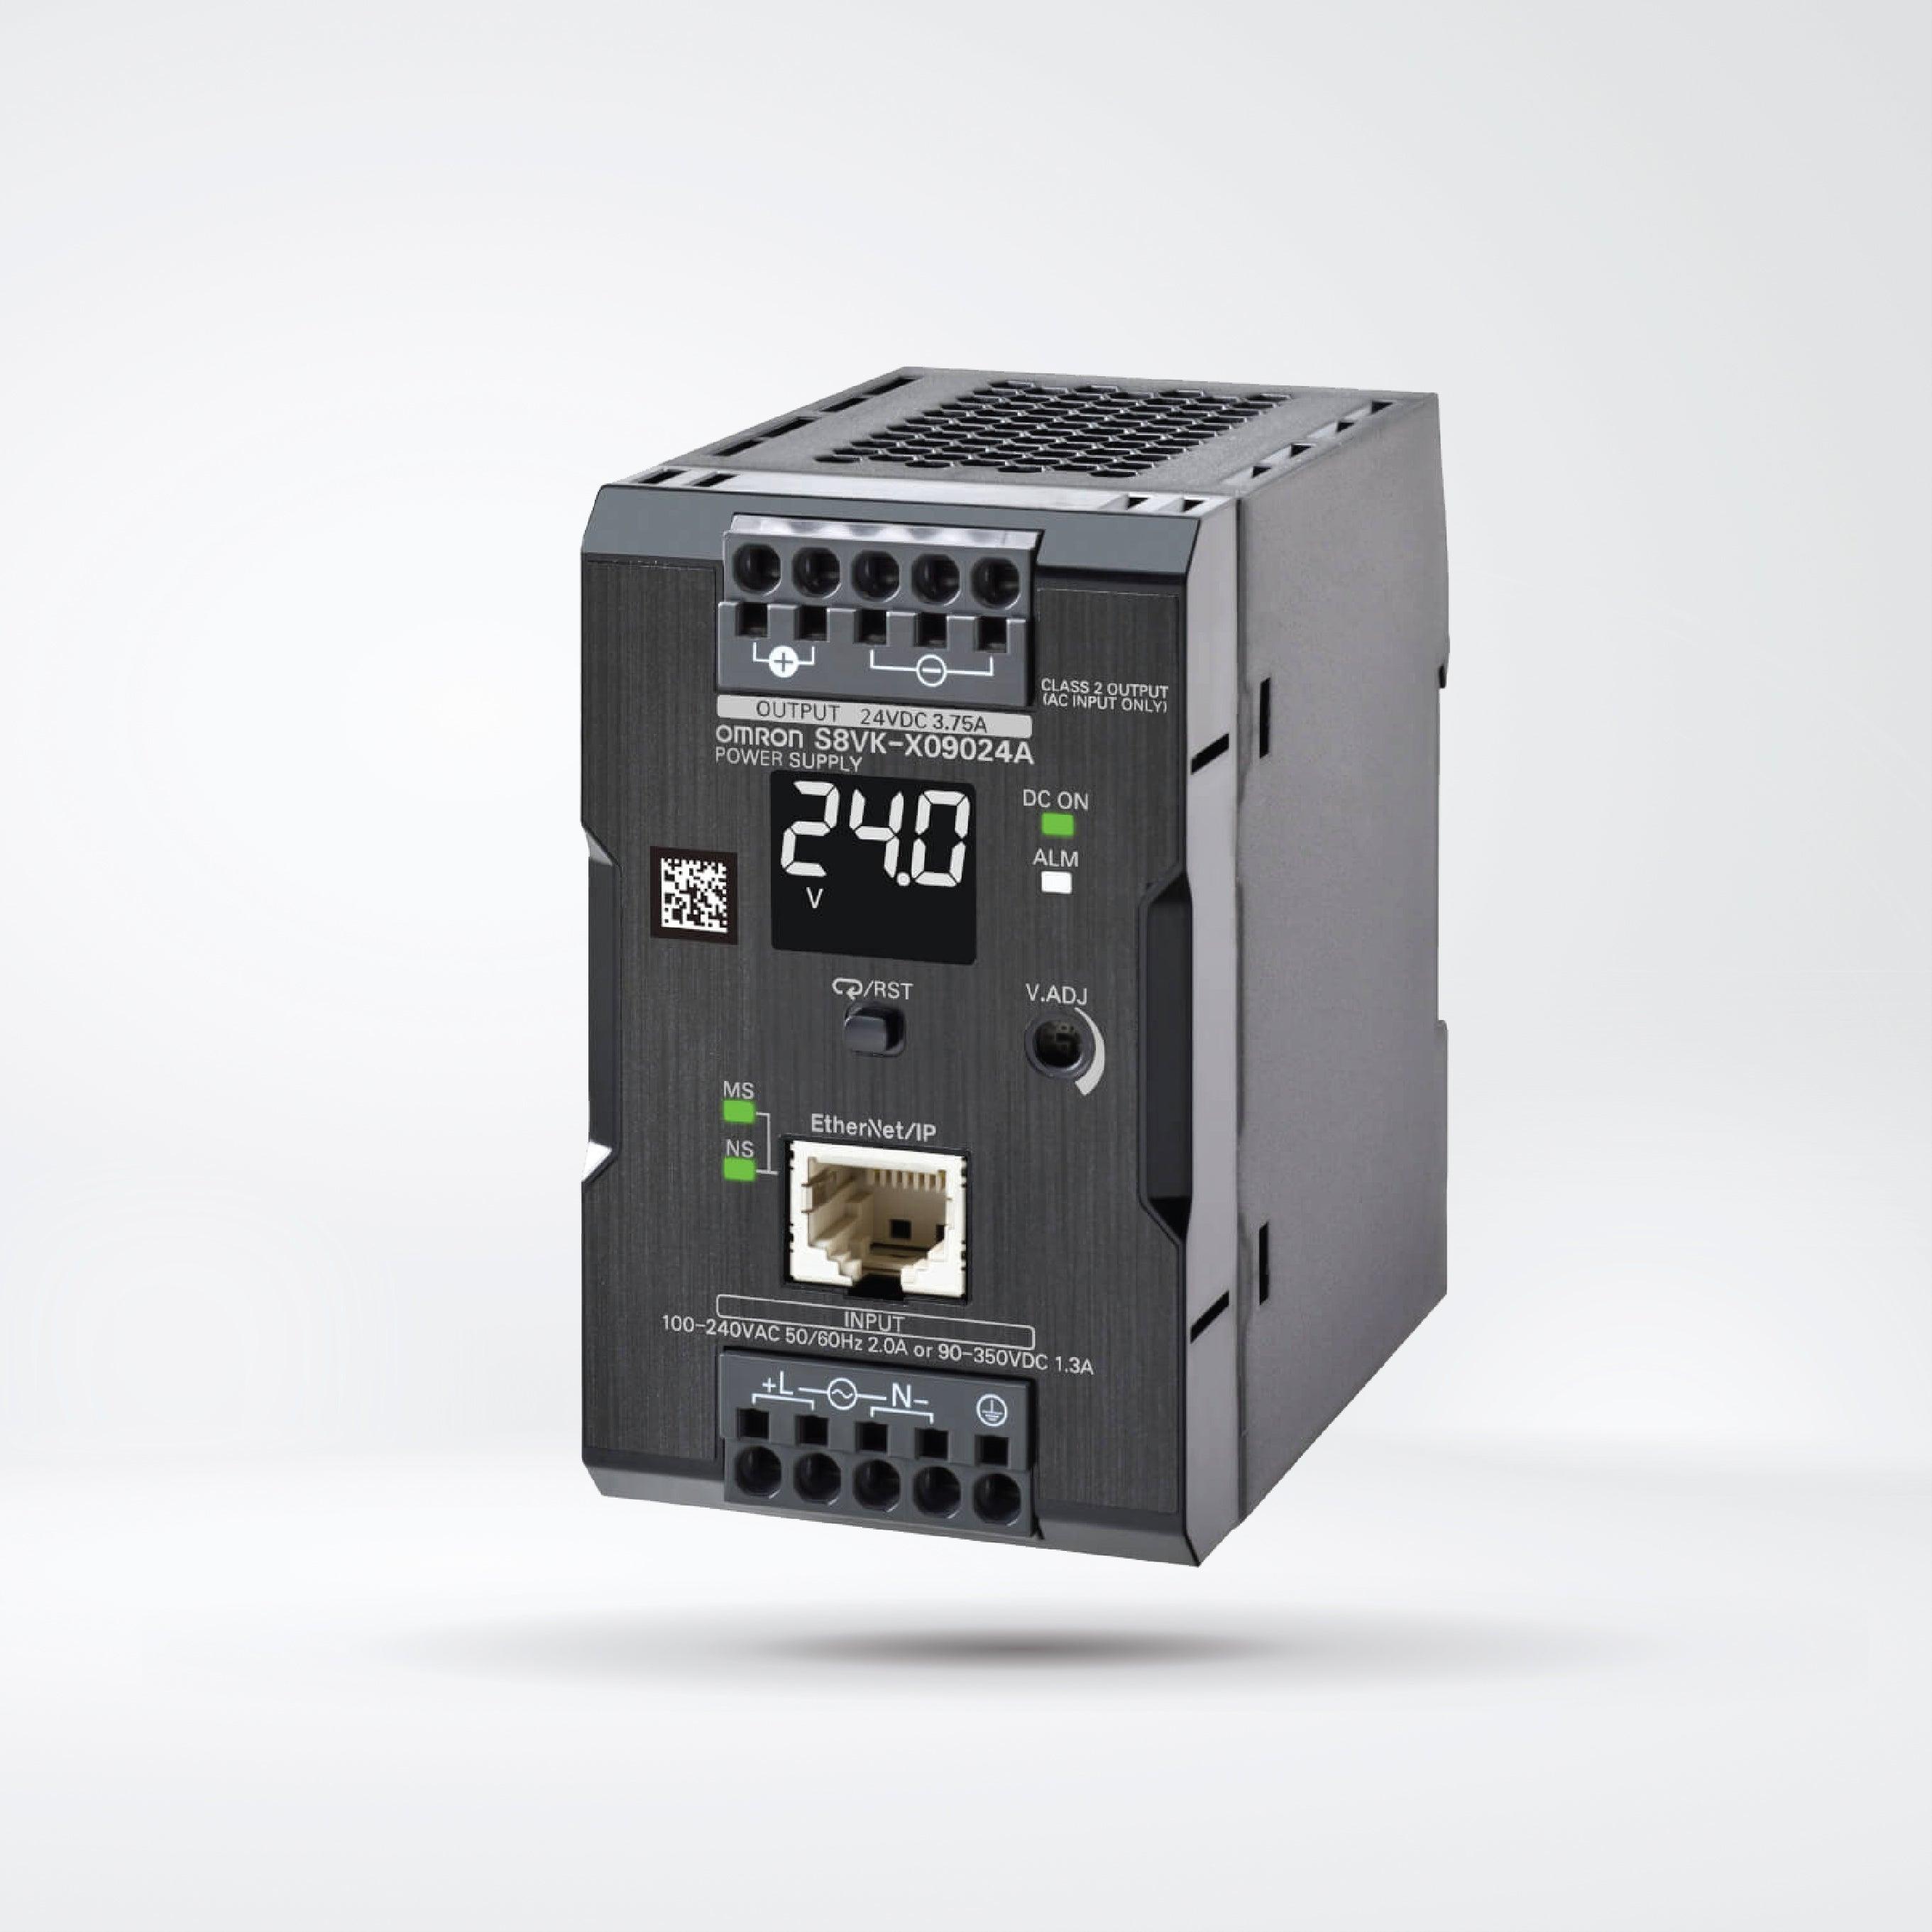 S8VK-X09024A-EIP Switch Mode Power Supply, with EtherNet/IP, Modbus TCP,90 W, 24 VDC, display - Riverplus